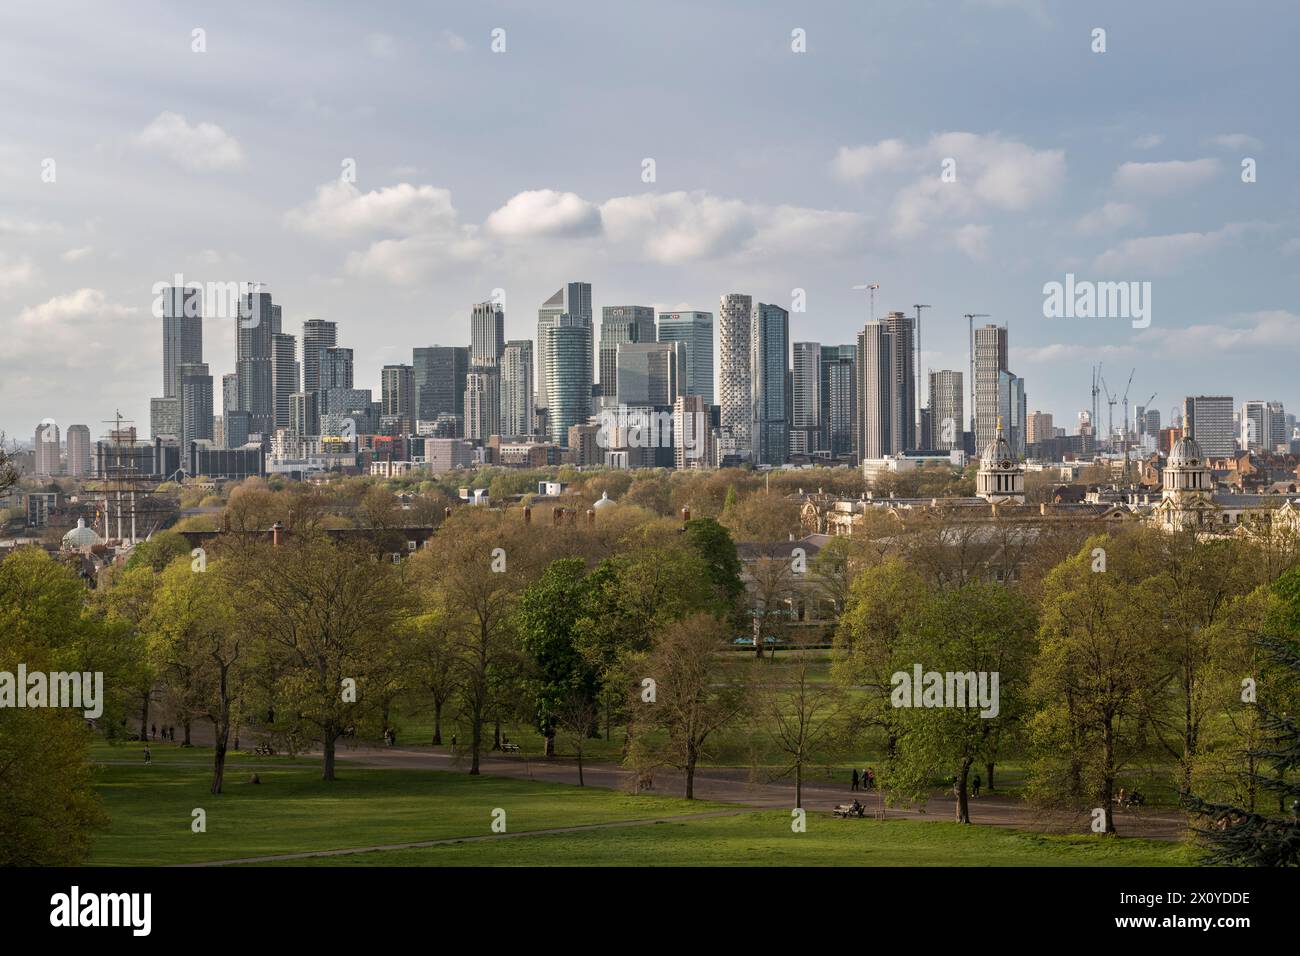 The financial and business district of Canary Wharf  in London, UK, seen from Greenwich Park across the River Thames Stock Photo